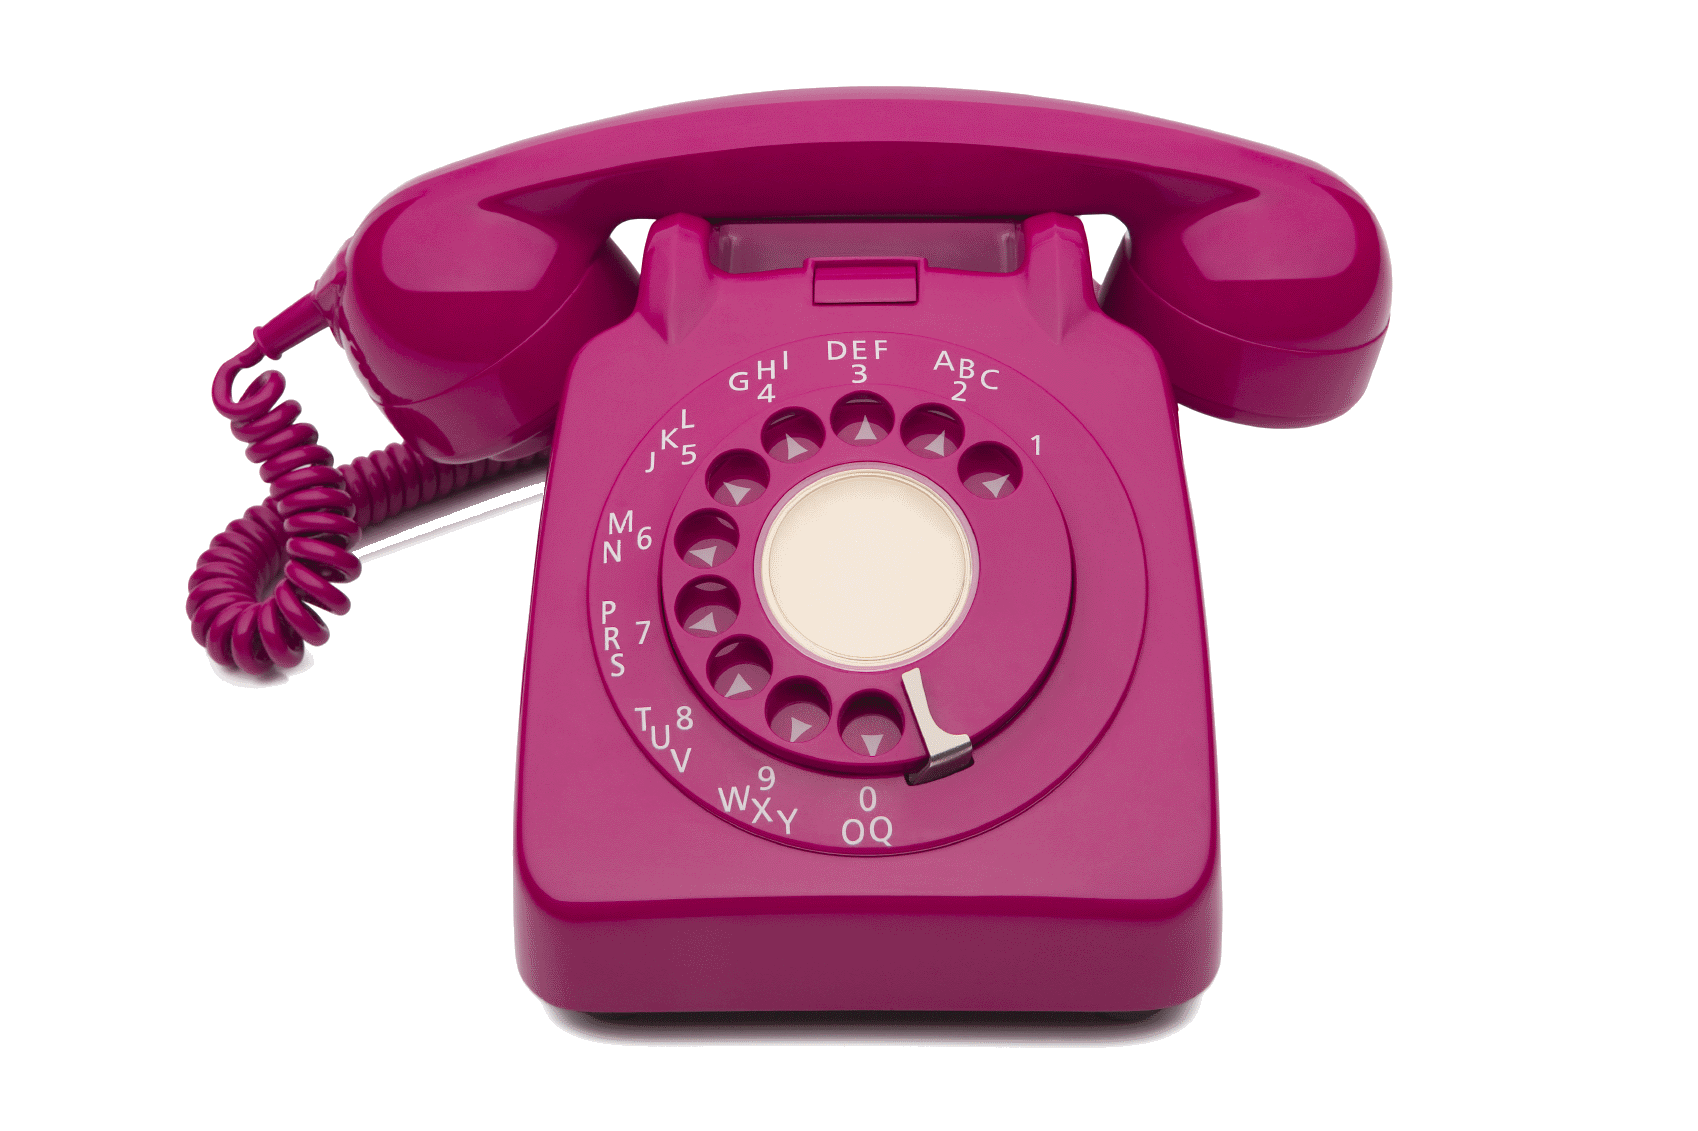 Telephone Image PNG HD - 125078